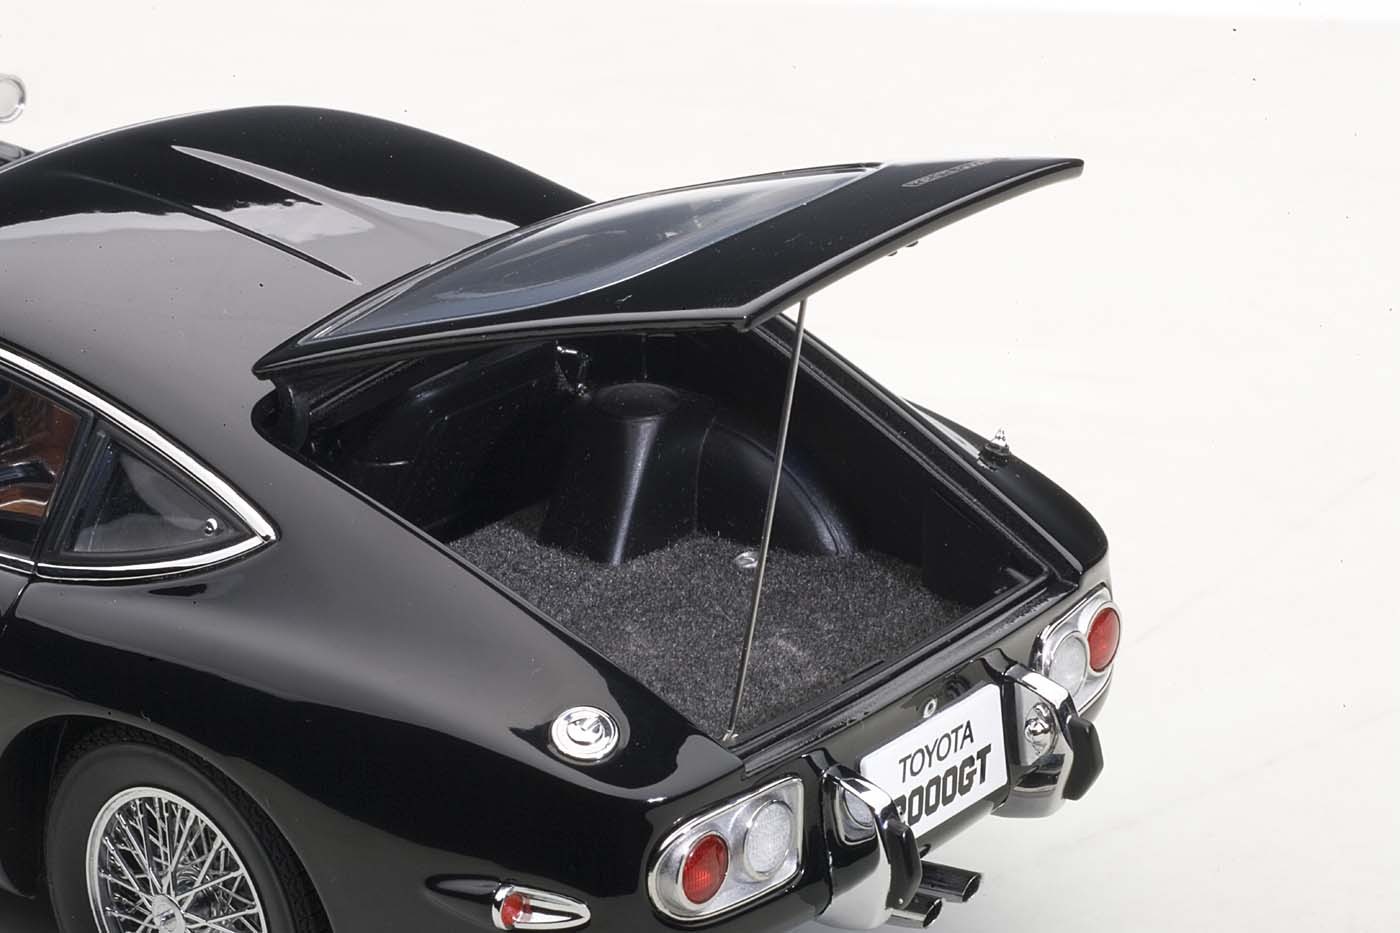 Toyota 2000 GT Upgraded Coupe Black 78750 AUTOart die-cast scale model 1:18